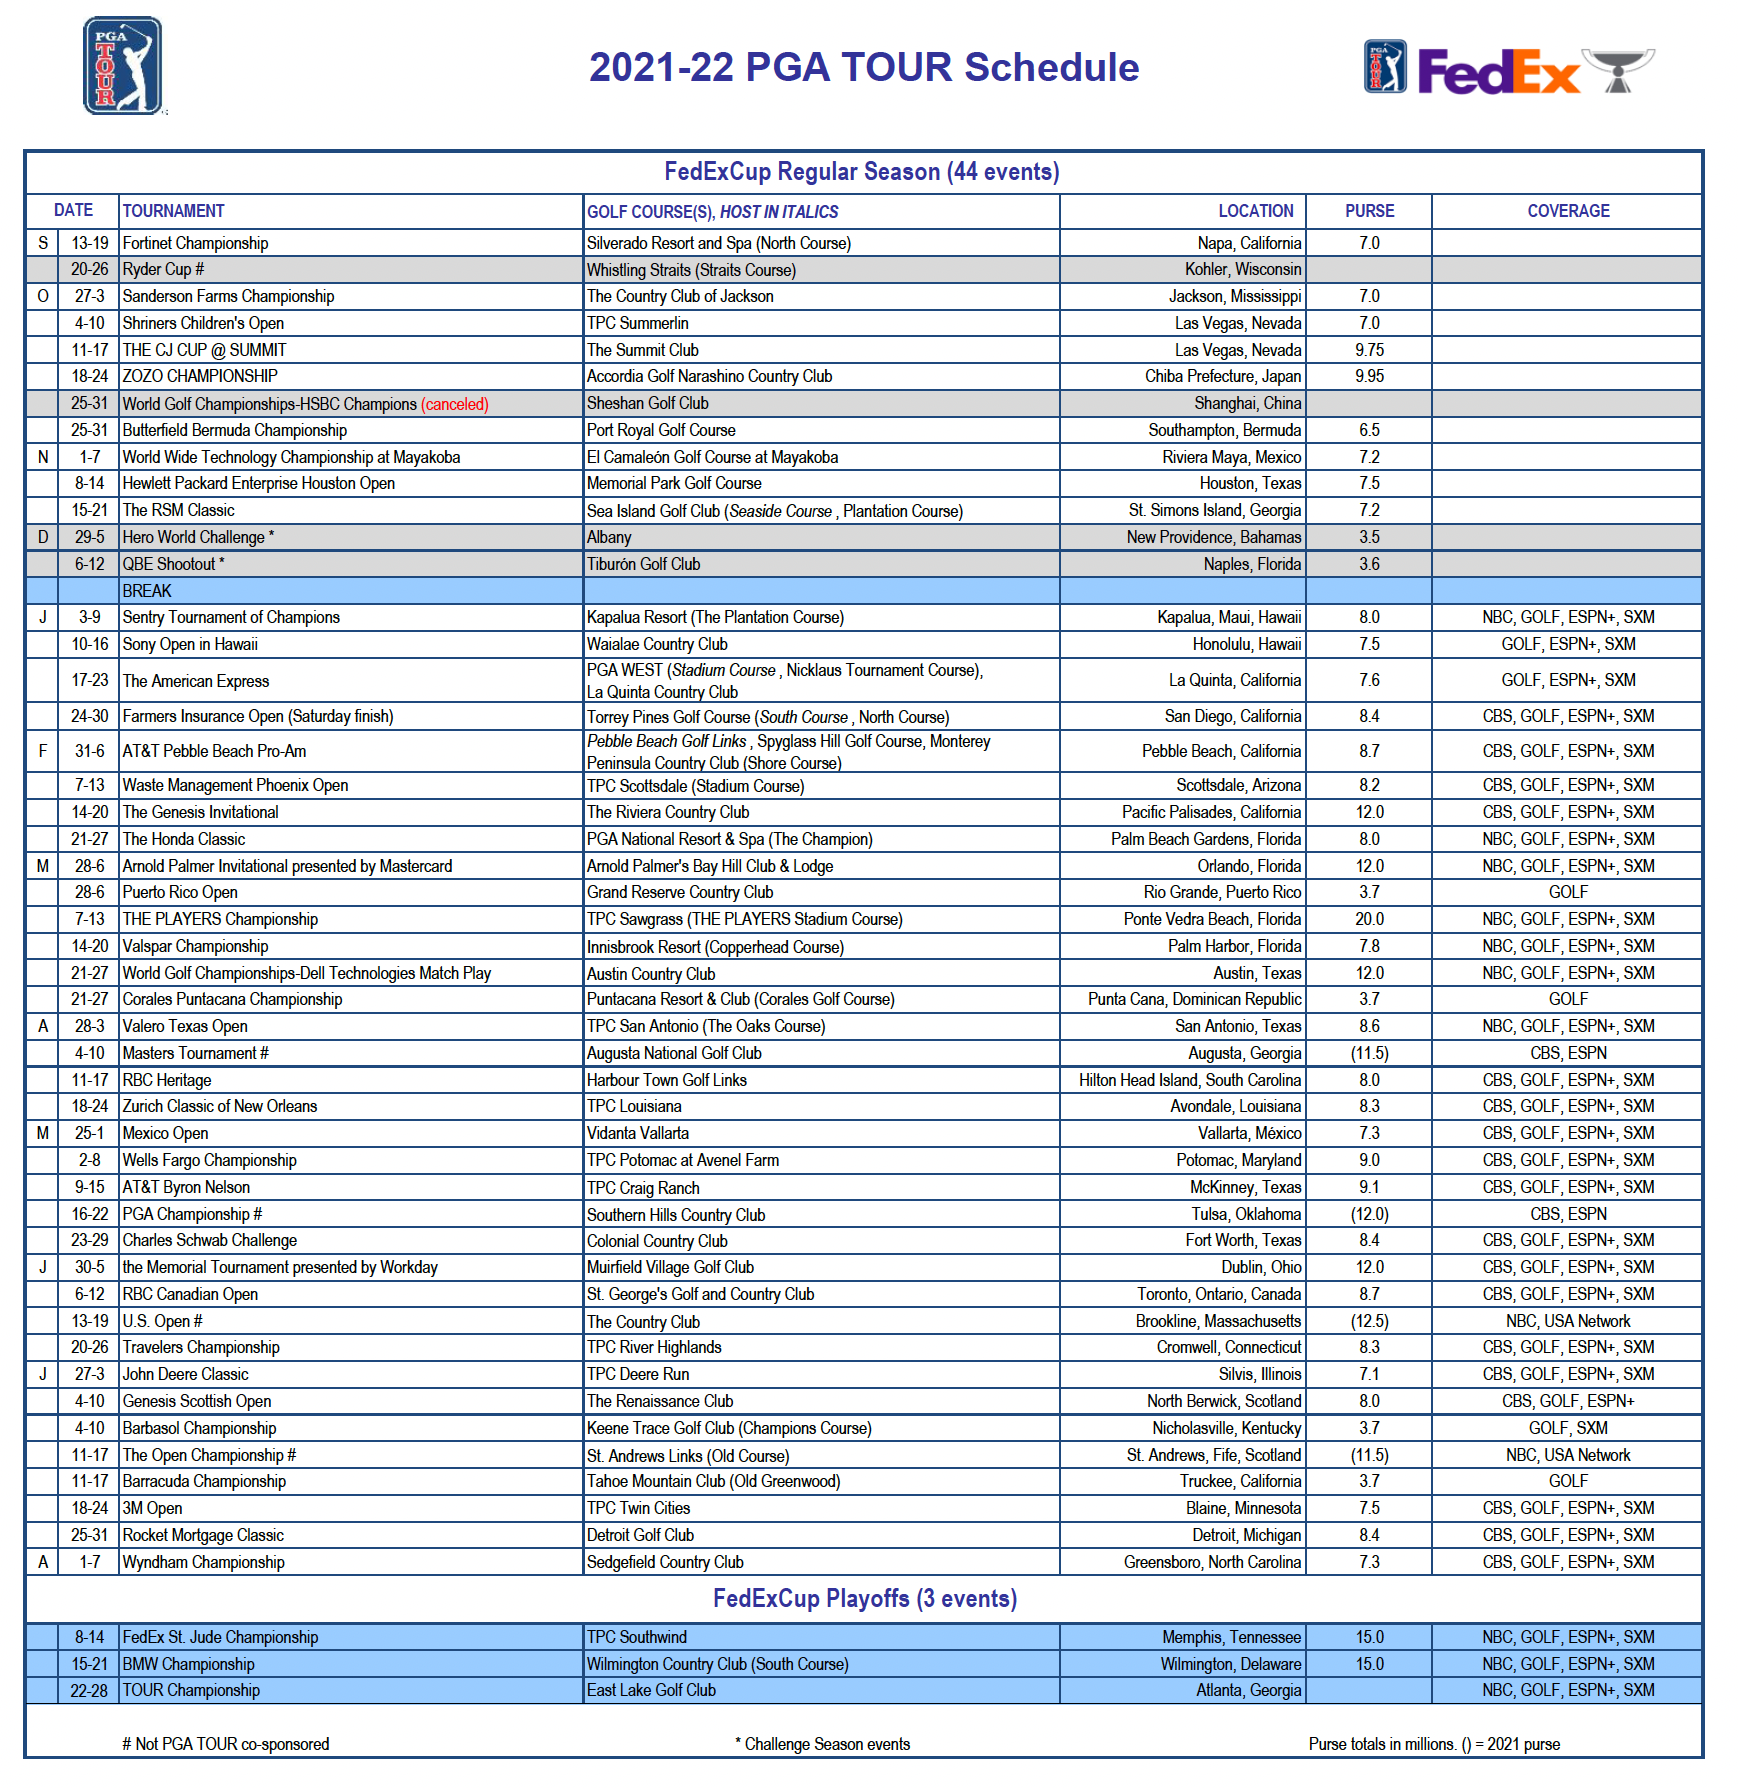 Nbc Fall Schedule 2022 2022 Pga Tour Broadcast Schedule: Cbs Goes International, Nbc Gets The  Playoffs, Espn+ To Have Four Daily Live Streams — Geoff Shackelford